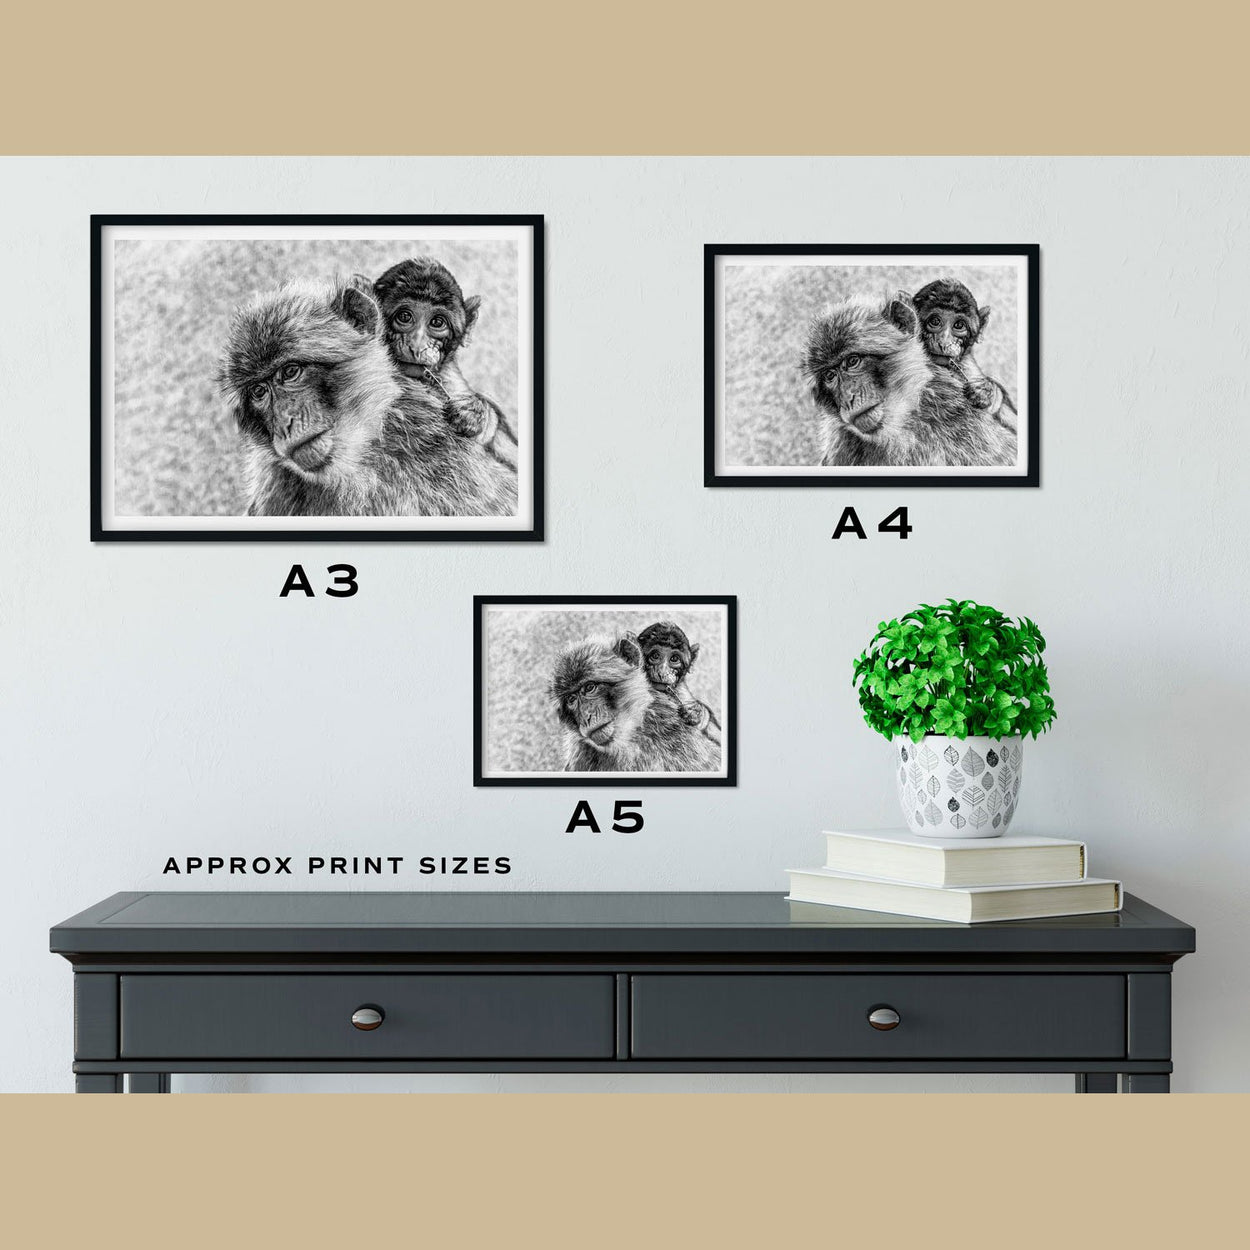 Macaques Prints Size Comparison - The Thriving Wild